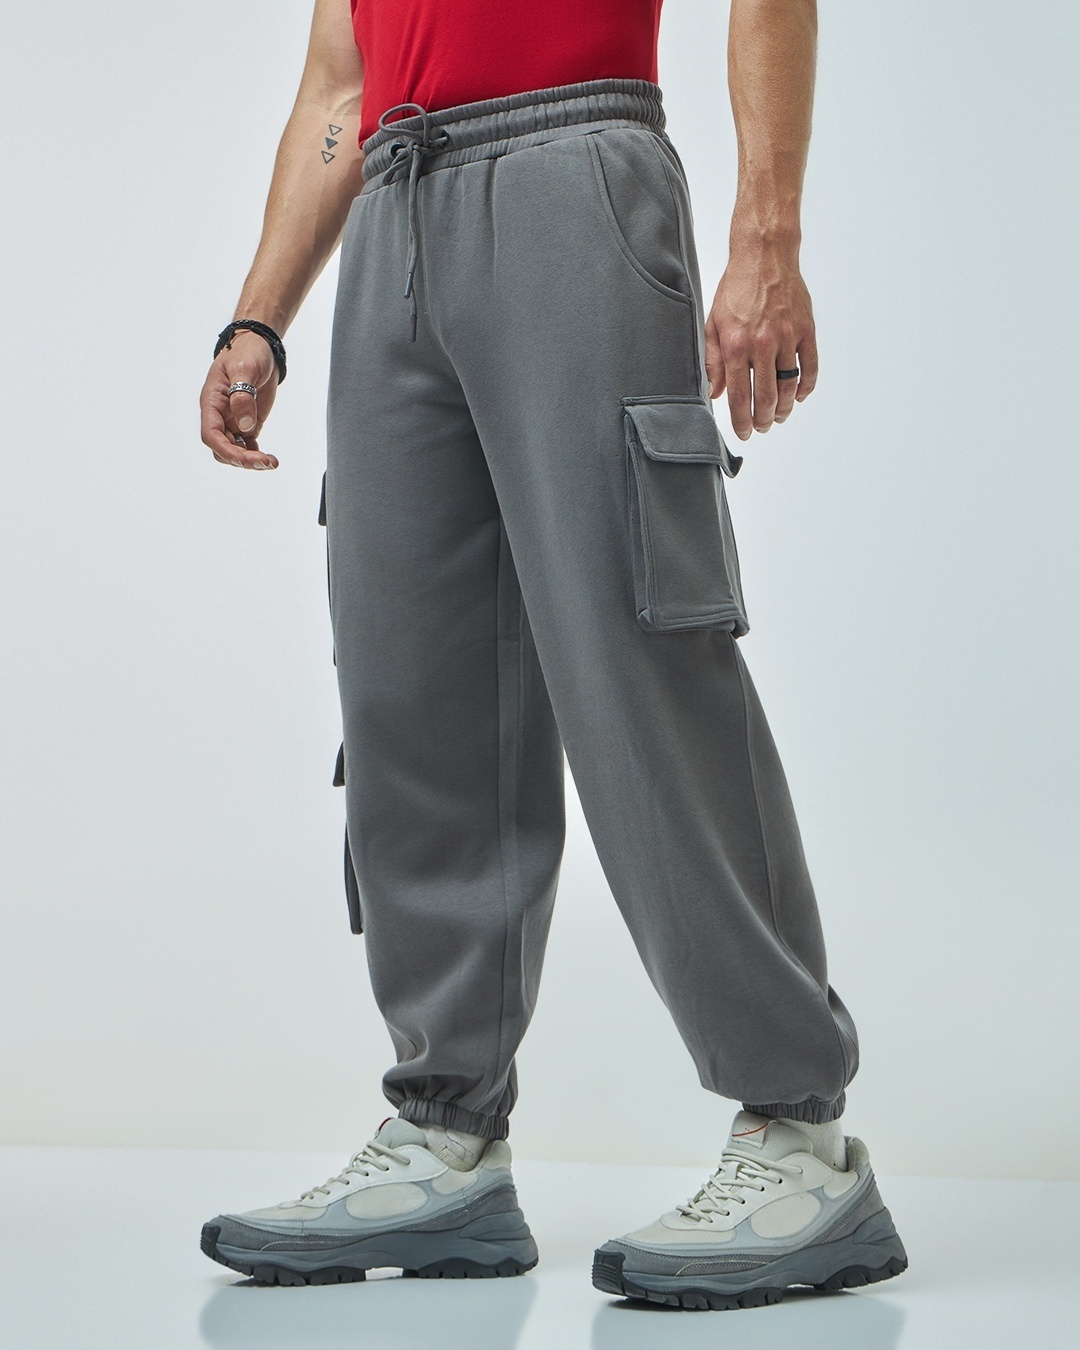 Baggy Cargo Pants - Stylish and Functional Pants for Men and Women – WINNER  OF VICTORIES